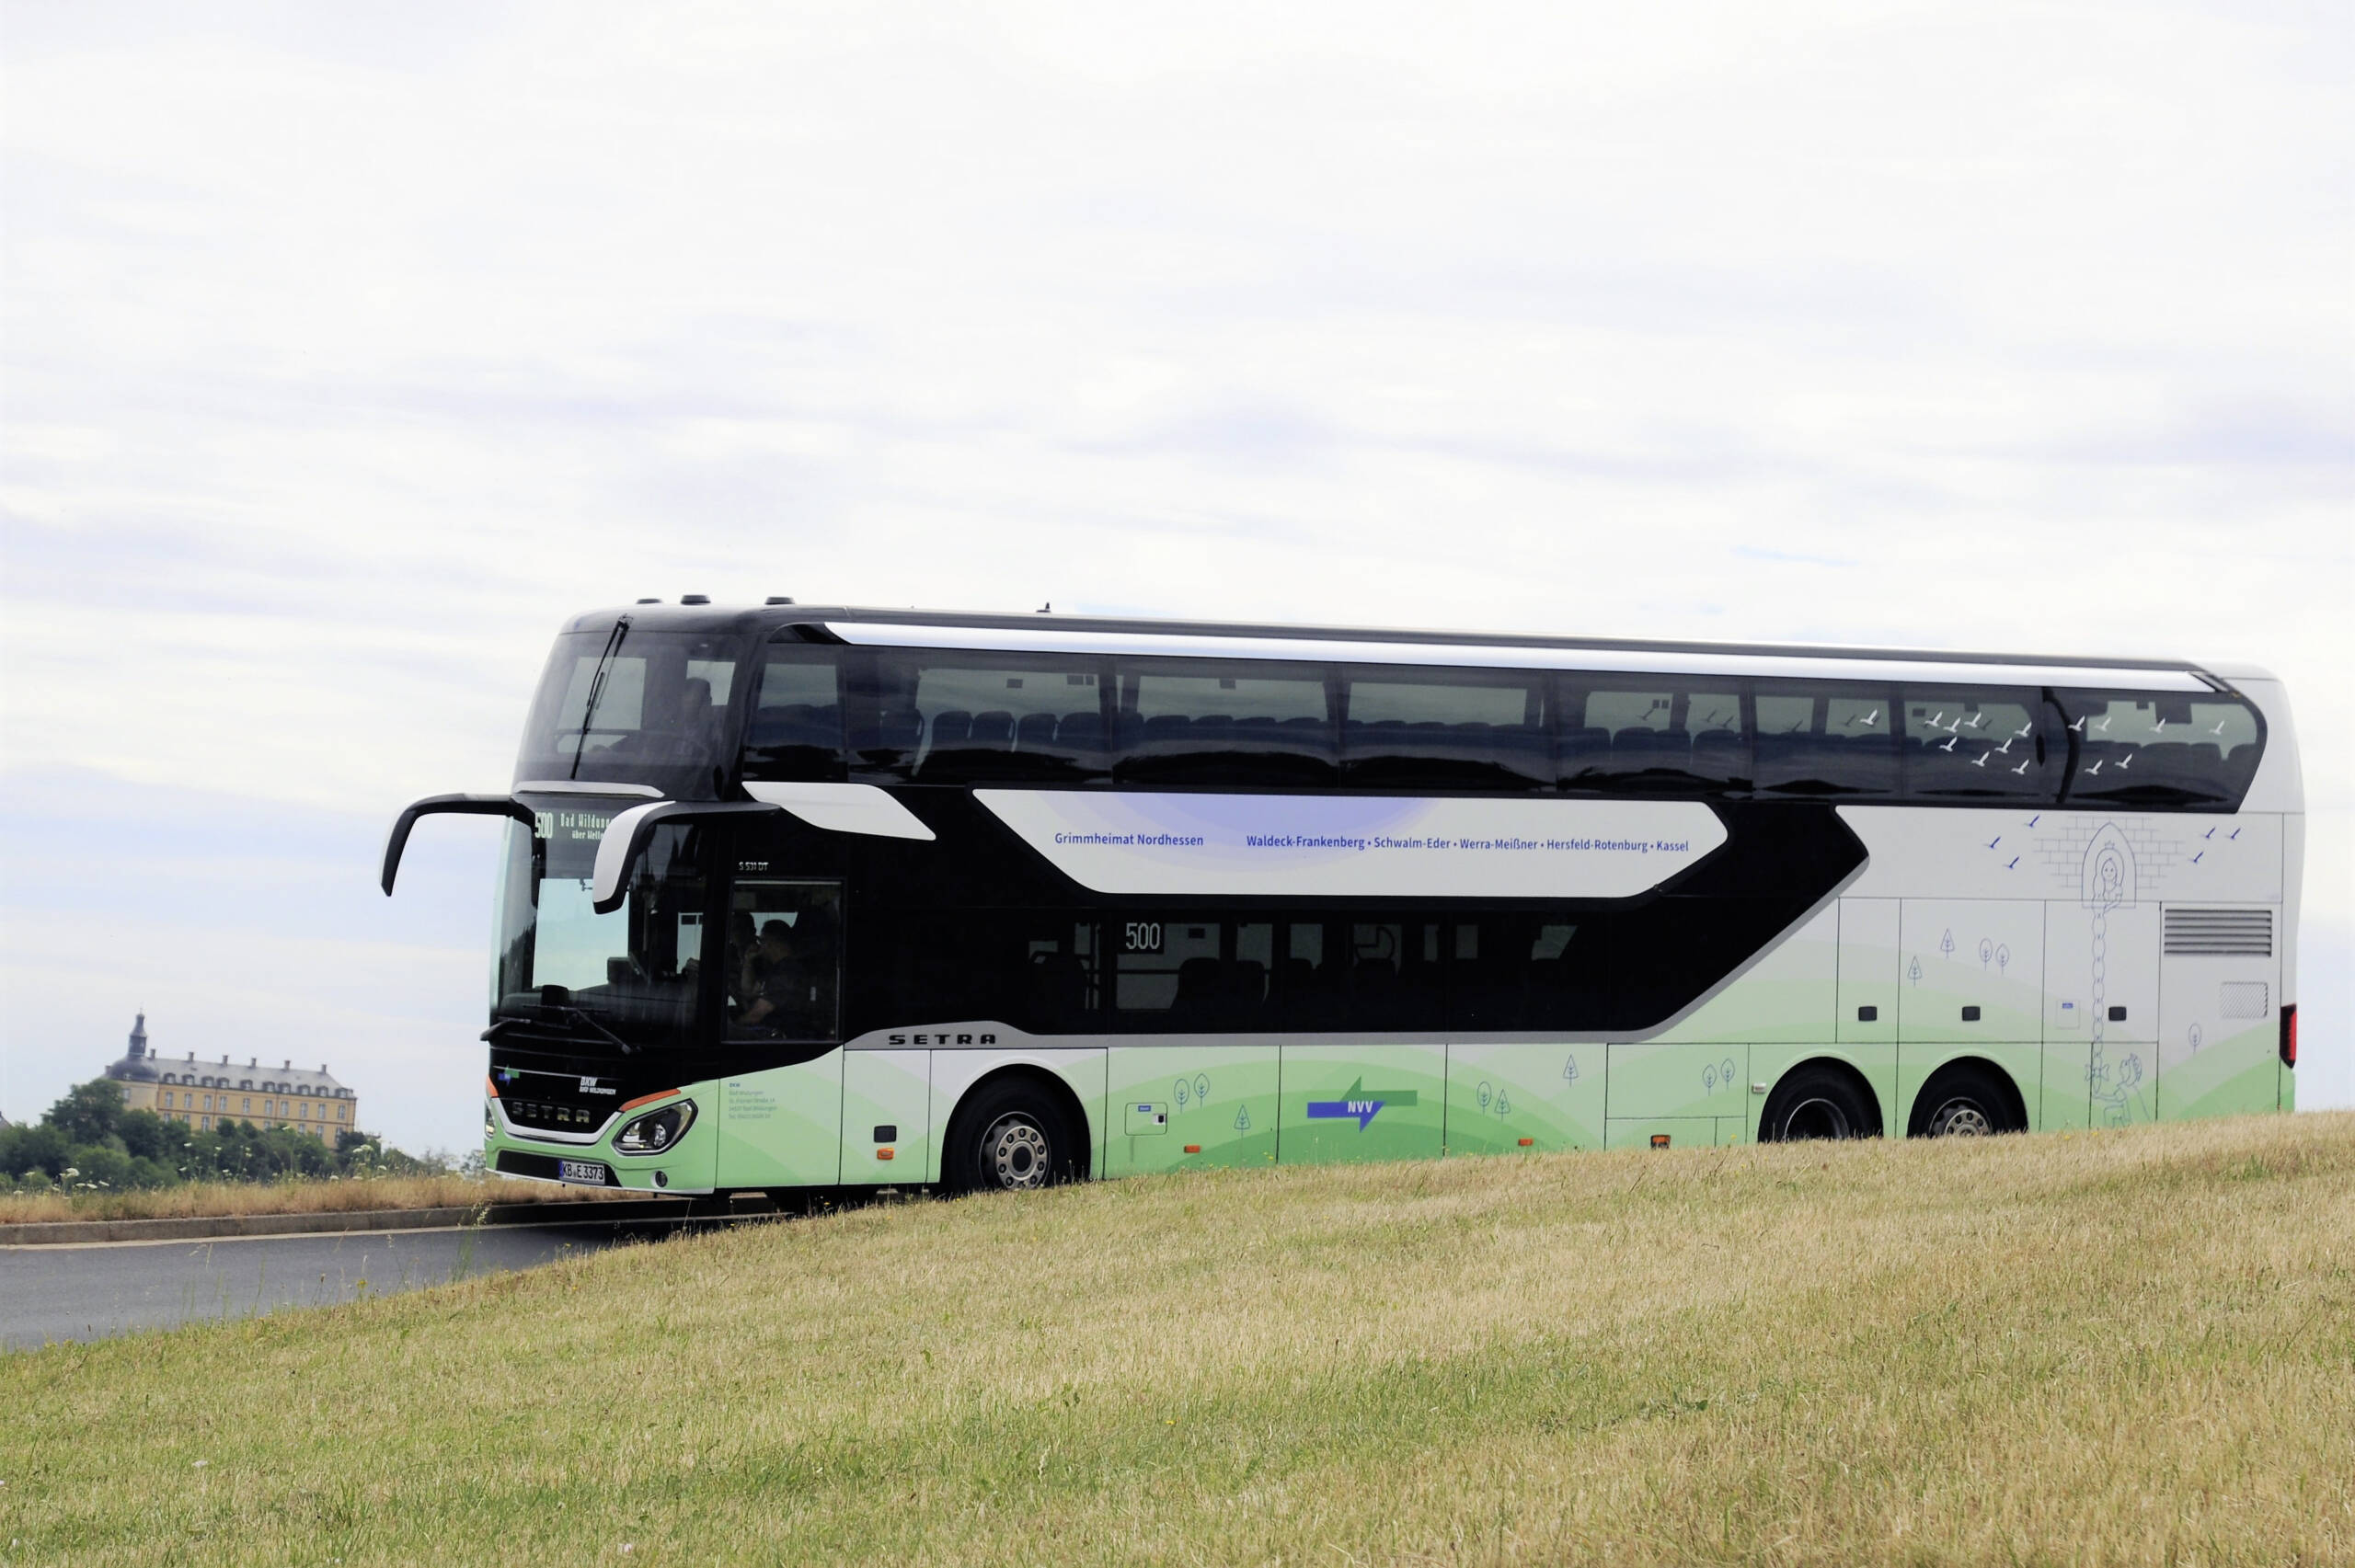 Bad Wildunger Kraftwagenverkehrs- und Wasserversorgungsgesellschaft (BKW) mbH has added five new Setra double-decker buses to its fleet. The S 531 DT will be used on behalf of the North Hessian Transport Association (NVV) on the 50-kilometer long bus route 500 from Bad Wildungen to Kassel.